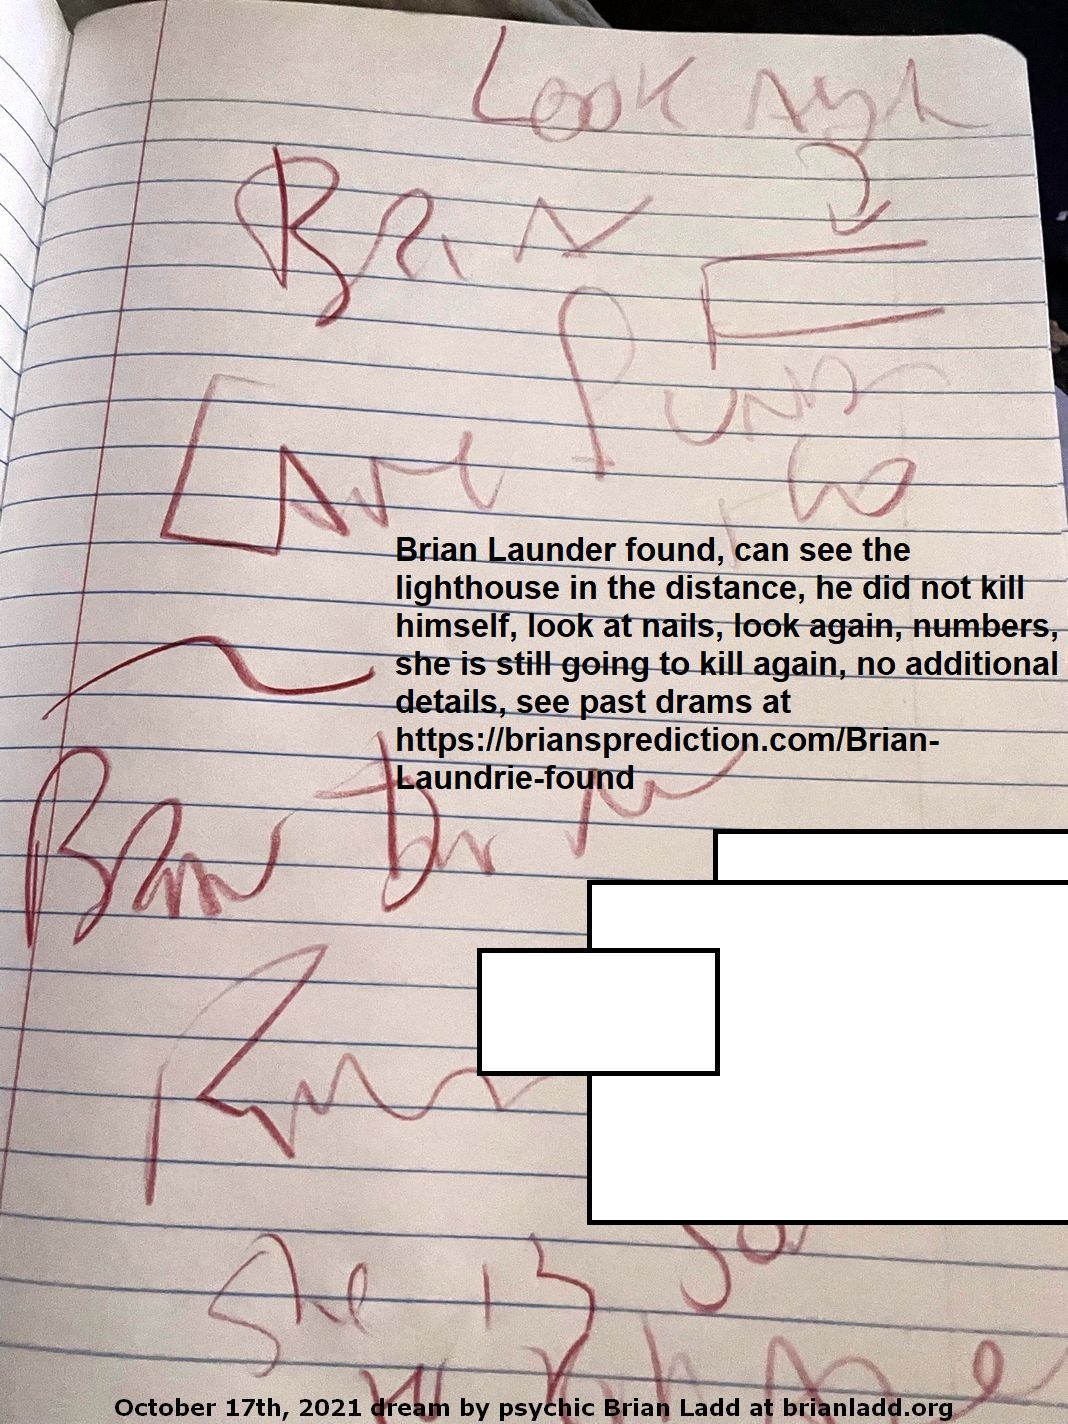 17 Oct 2021 6 Brian Launder found, can see the lighthouse in the distance, he did not kill himself, look at nails, look again, numbers, she is still going to kill again, no additional details, see past drams at ...
Brian Launder found, can see the lighthouse in the distance, he did not kill himself, look at nails, look again, numbers, she is still going to kill again, no additional details, see past drams at https://briansprediction.com/Brian-Laundrie-found
